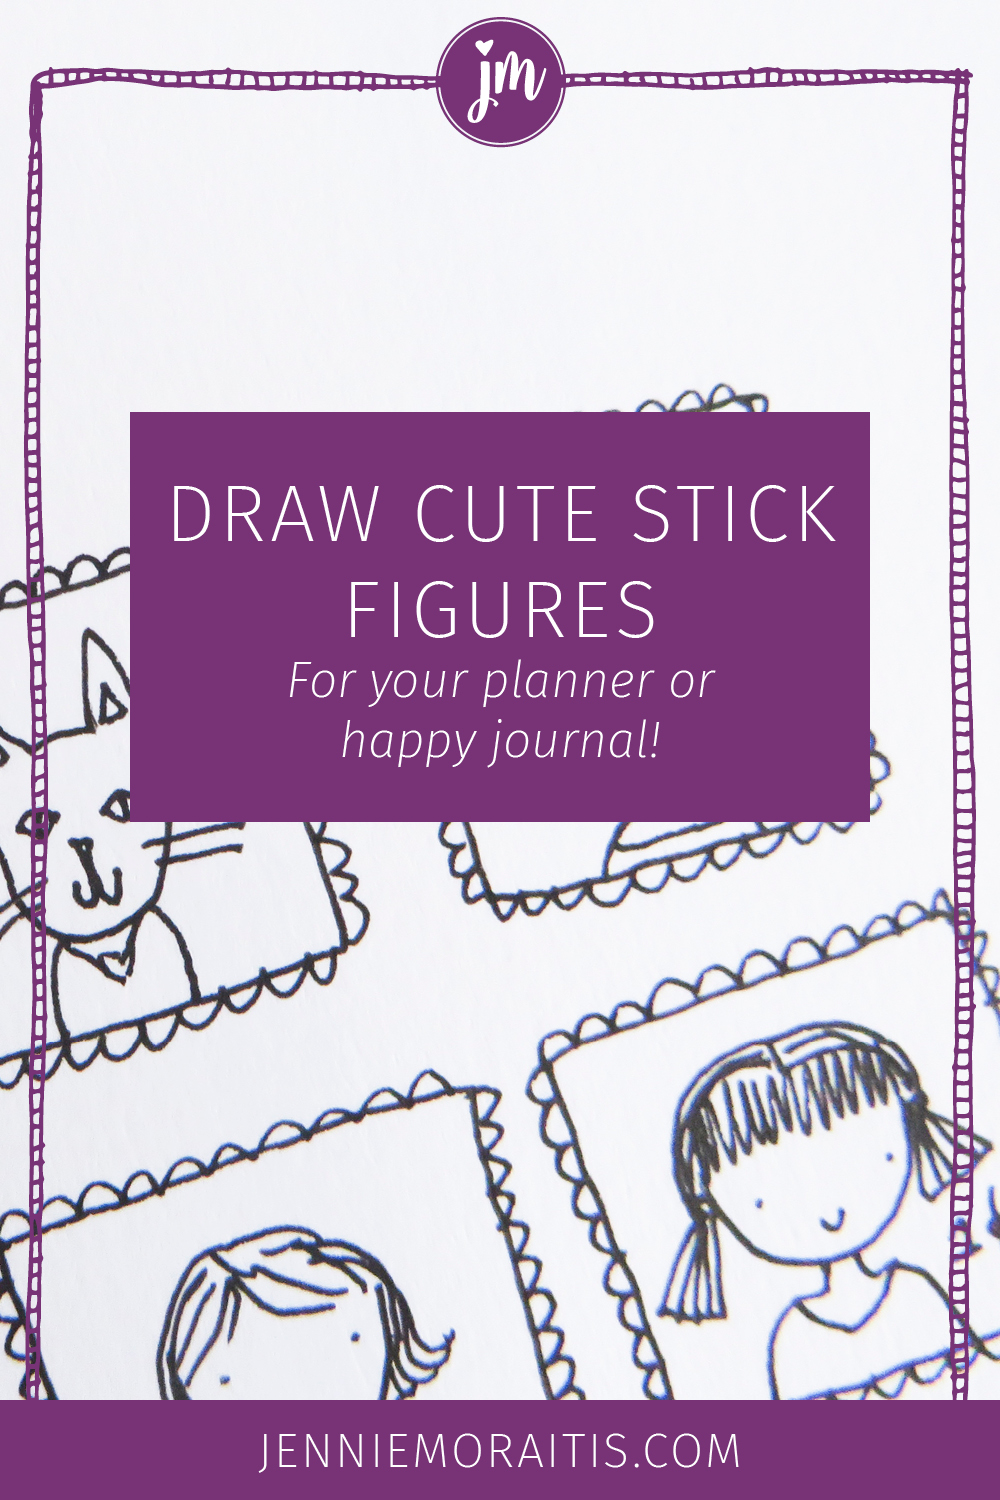 Today I'm going to teach you how to draw cute stick figures for your happy journal, planner, or four-year-old. We're going to unlock our playful side and learn that drawing is not something you have to go to art school for.